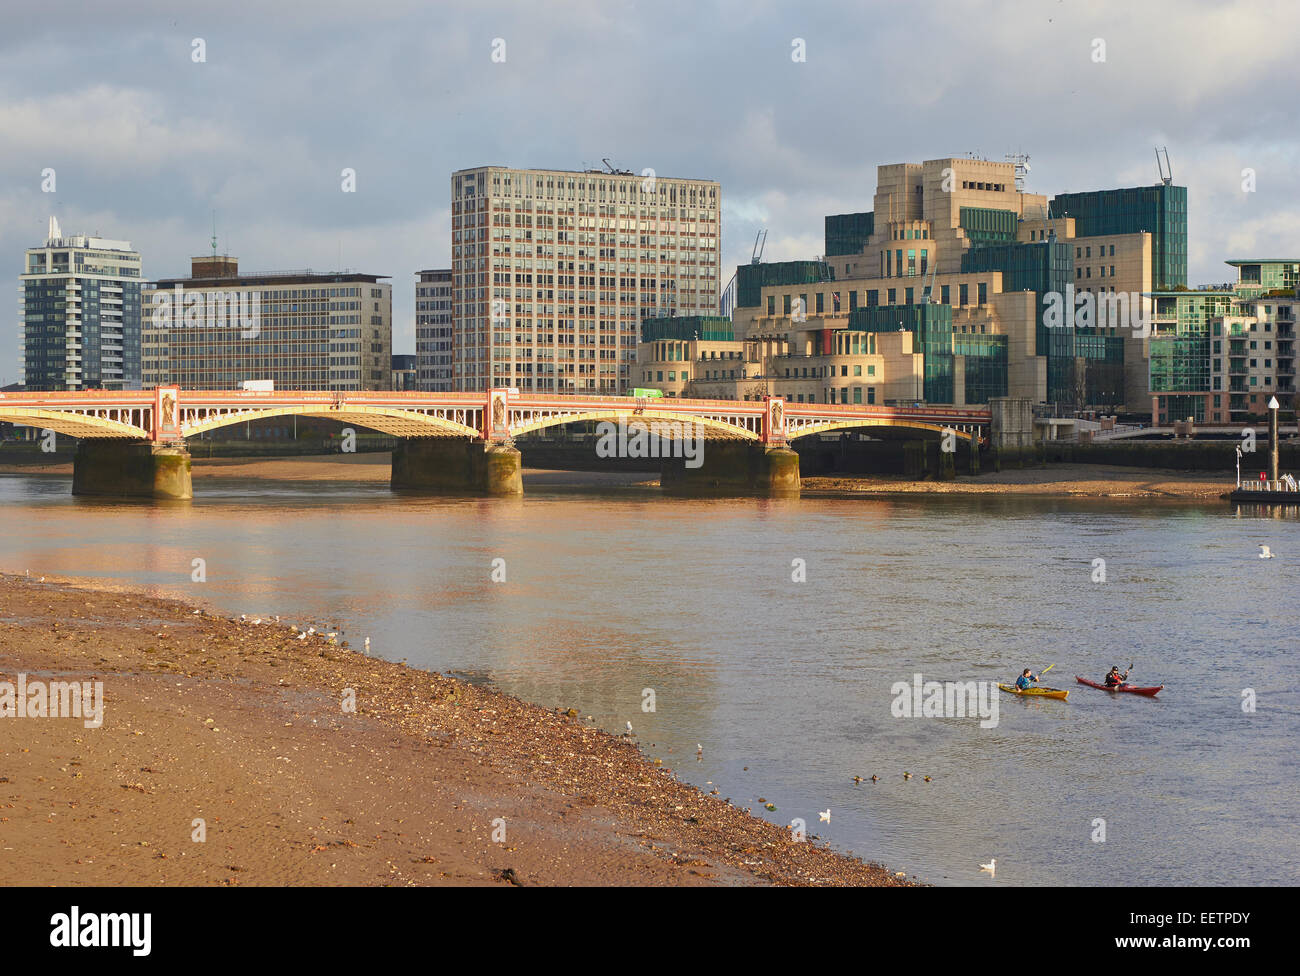 Vauxhall bridge with the Secret Intelligence Service or MI6 building on South Bank and rowers on the river Thames London England Stock Photo